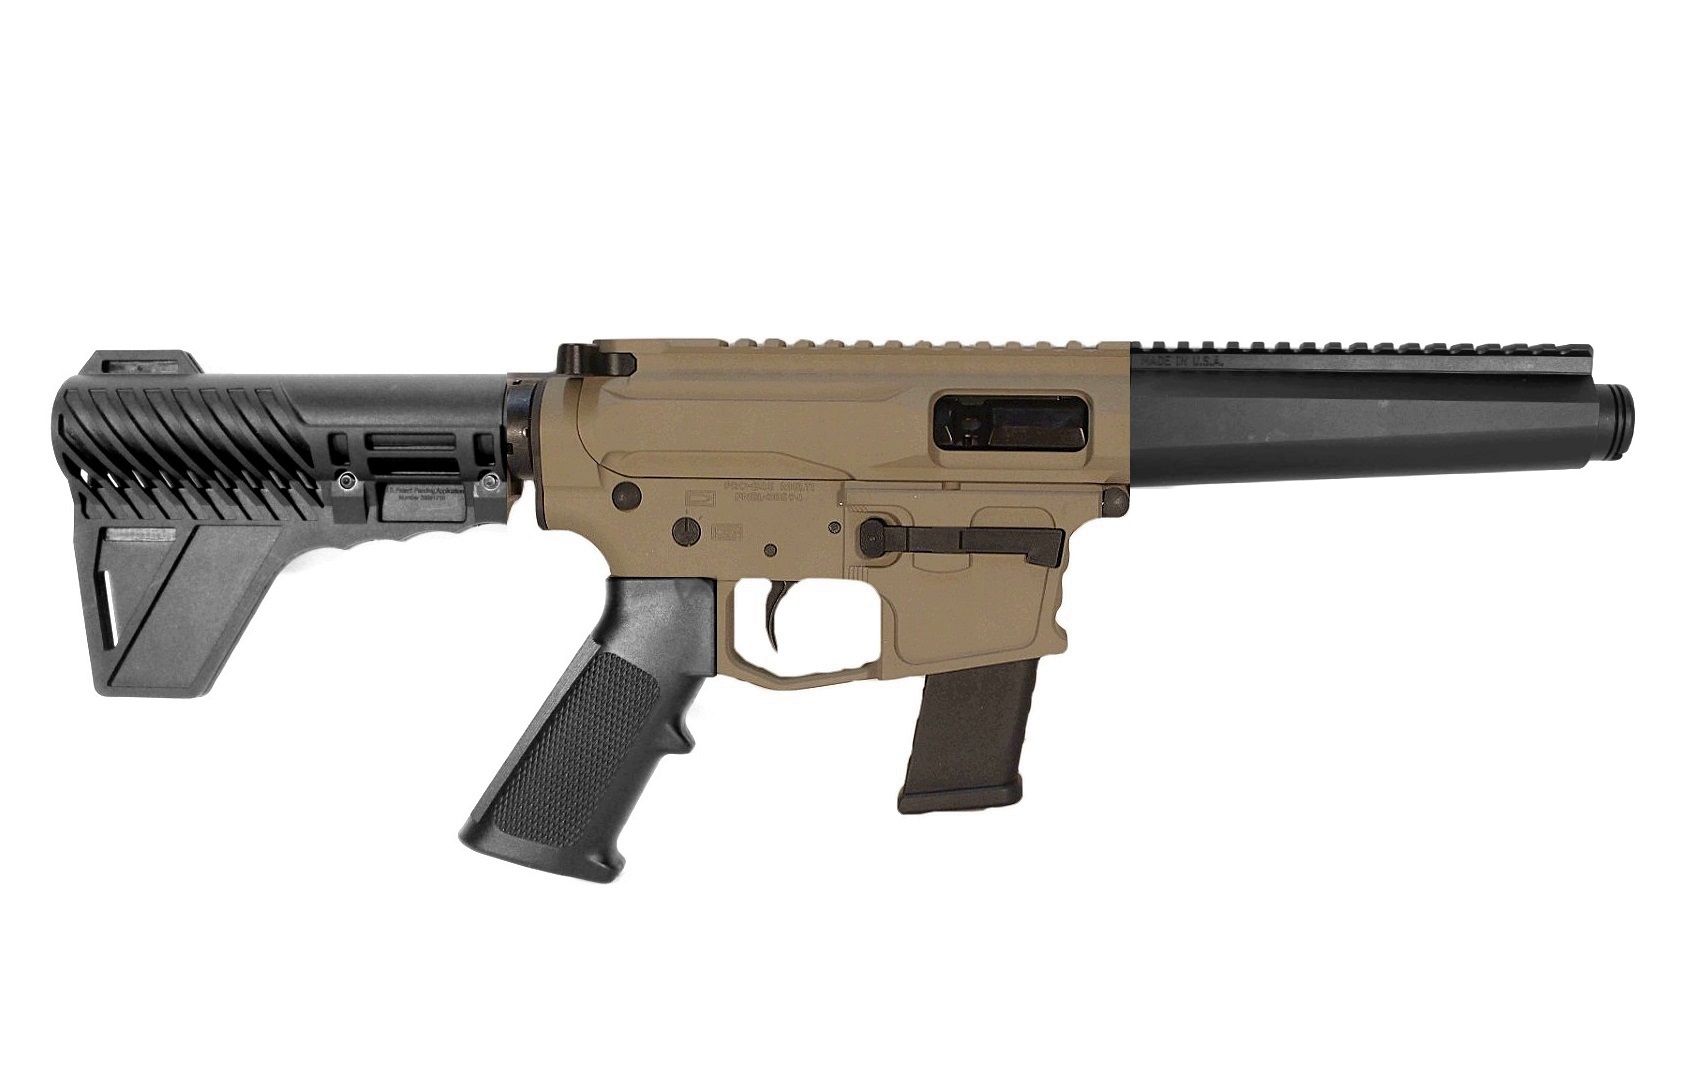 5 inch 9mm AR-9 Pistol |MP5 STYLE | USA MADE